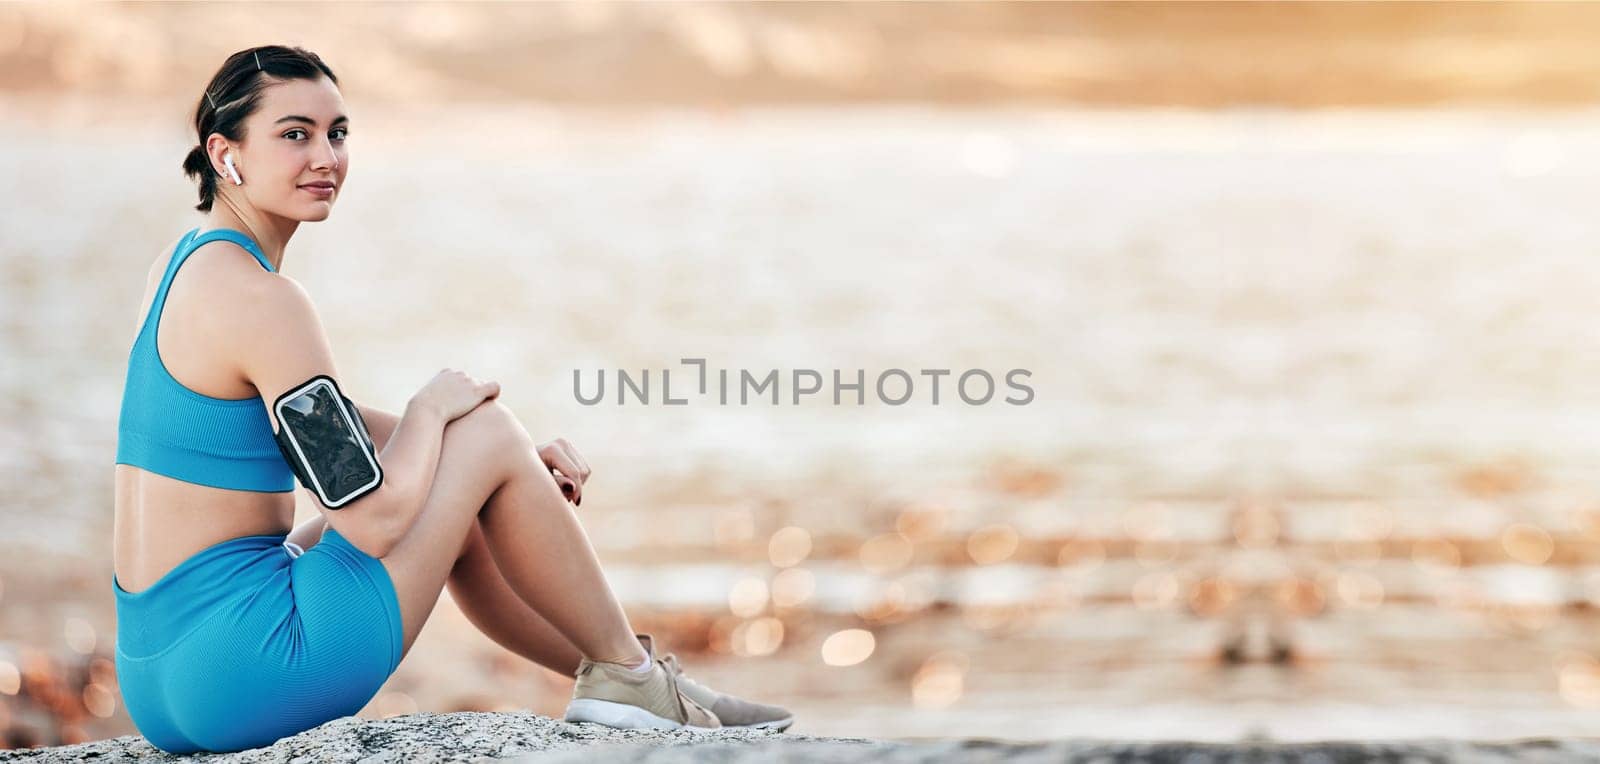 Workout, beach sunset or portrait of woman relax after outdoor running, sports training or fitness performance. Nature exercise mockup, waves or runner at sea for mental health, calm or freedom peace.